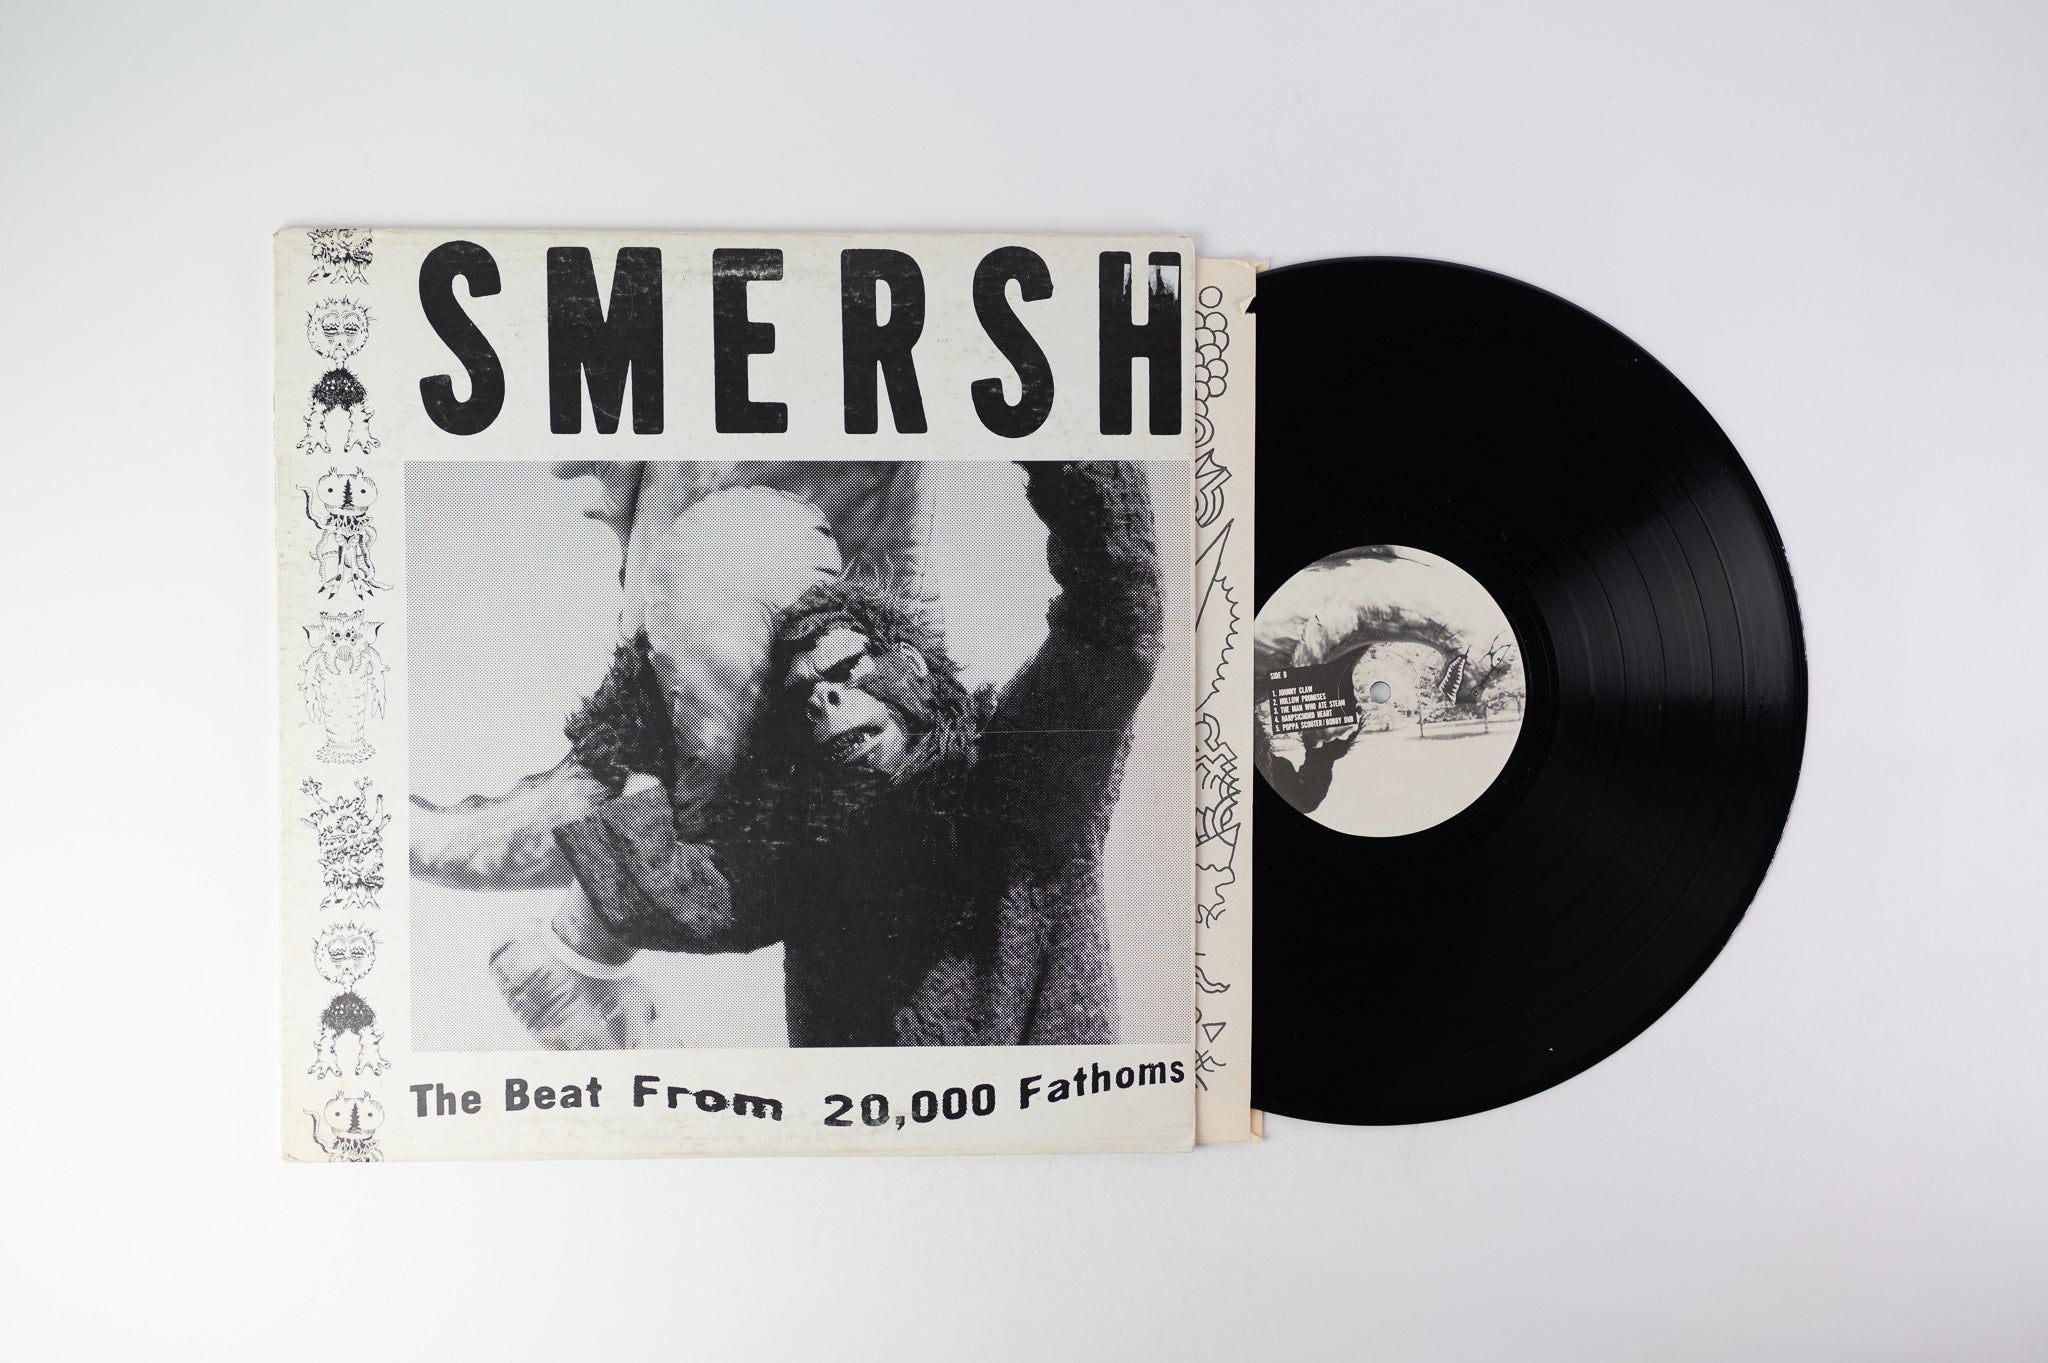 Smersh - The Beat From 20,000 Fathoms on RRRecords